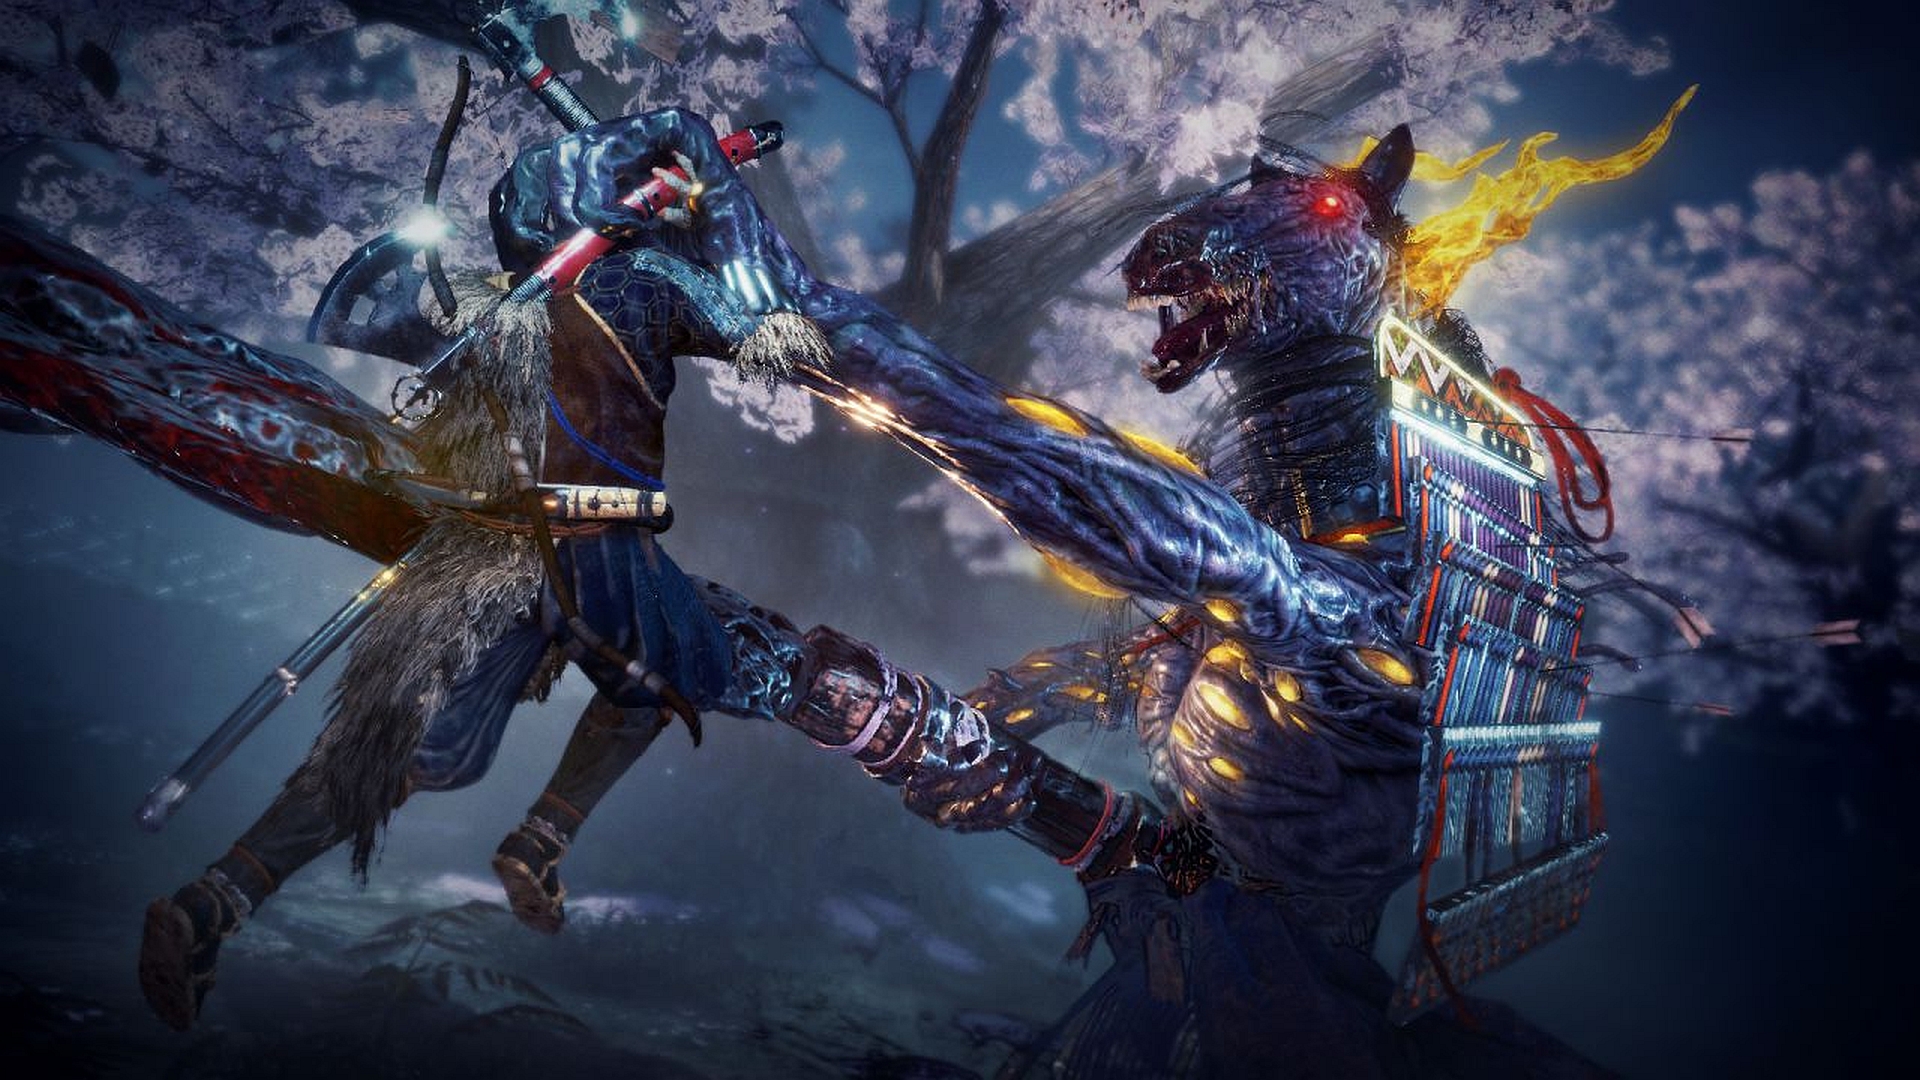 Nioh 2 Complete Edition Confirmed for PCwccftech.com